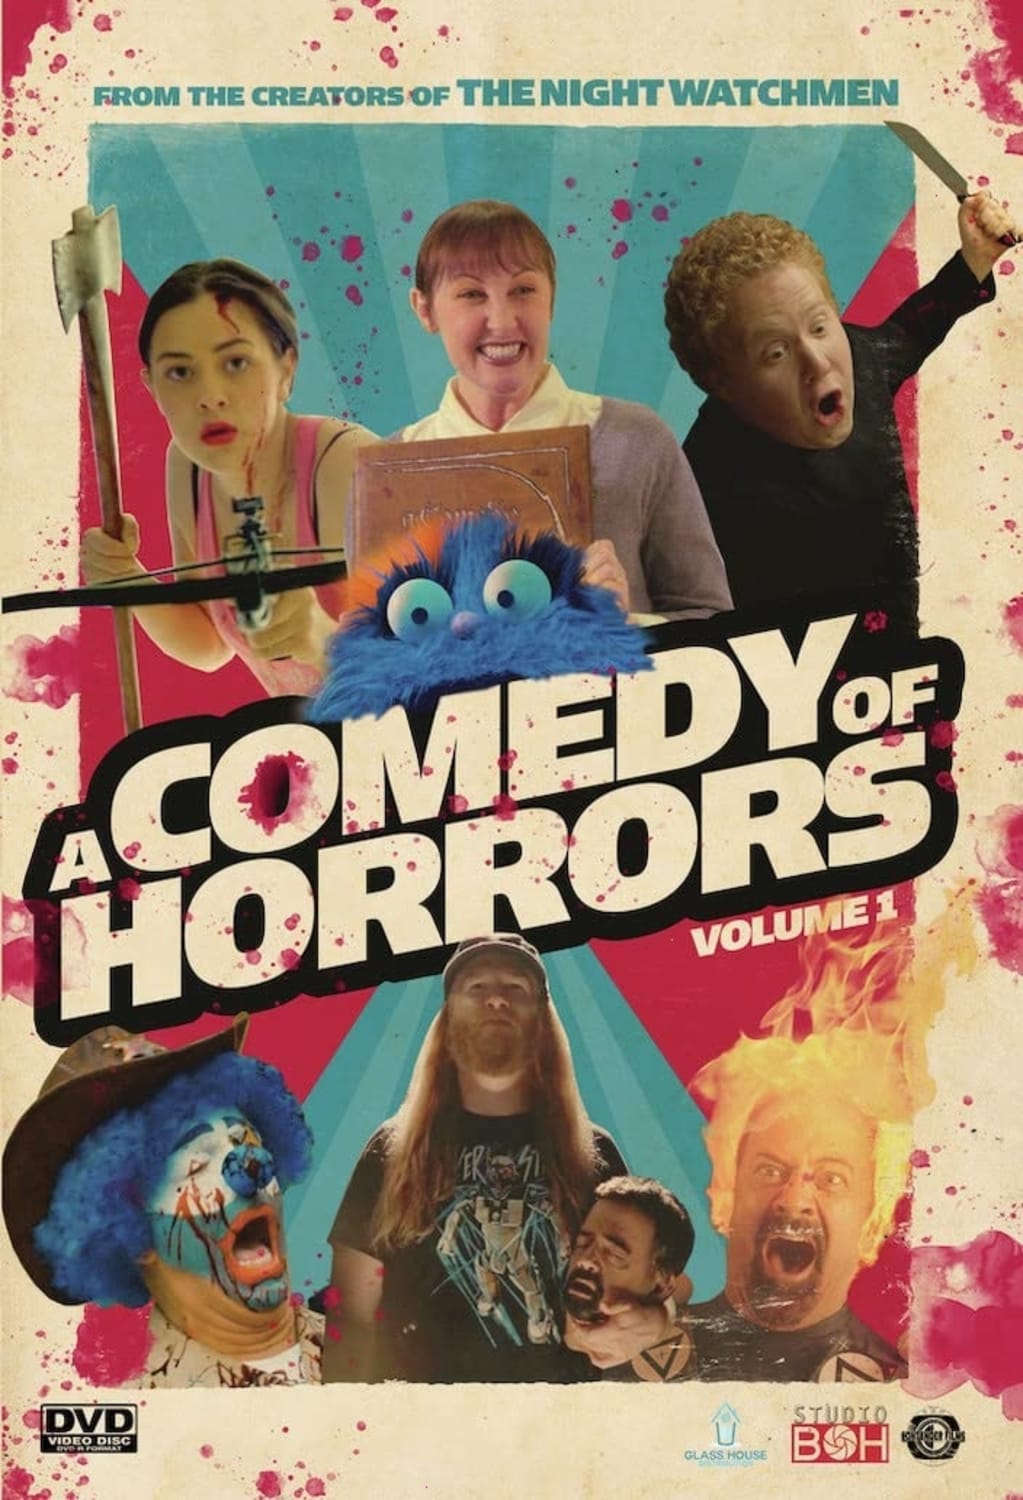 A Comedy of Horrors, Volume 1 & 2 (DVD) on MovieShack